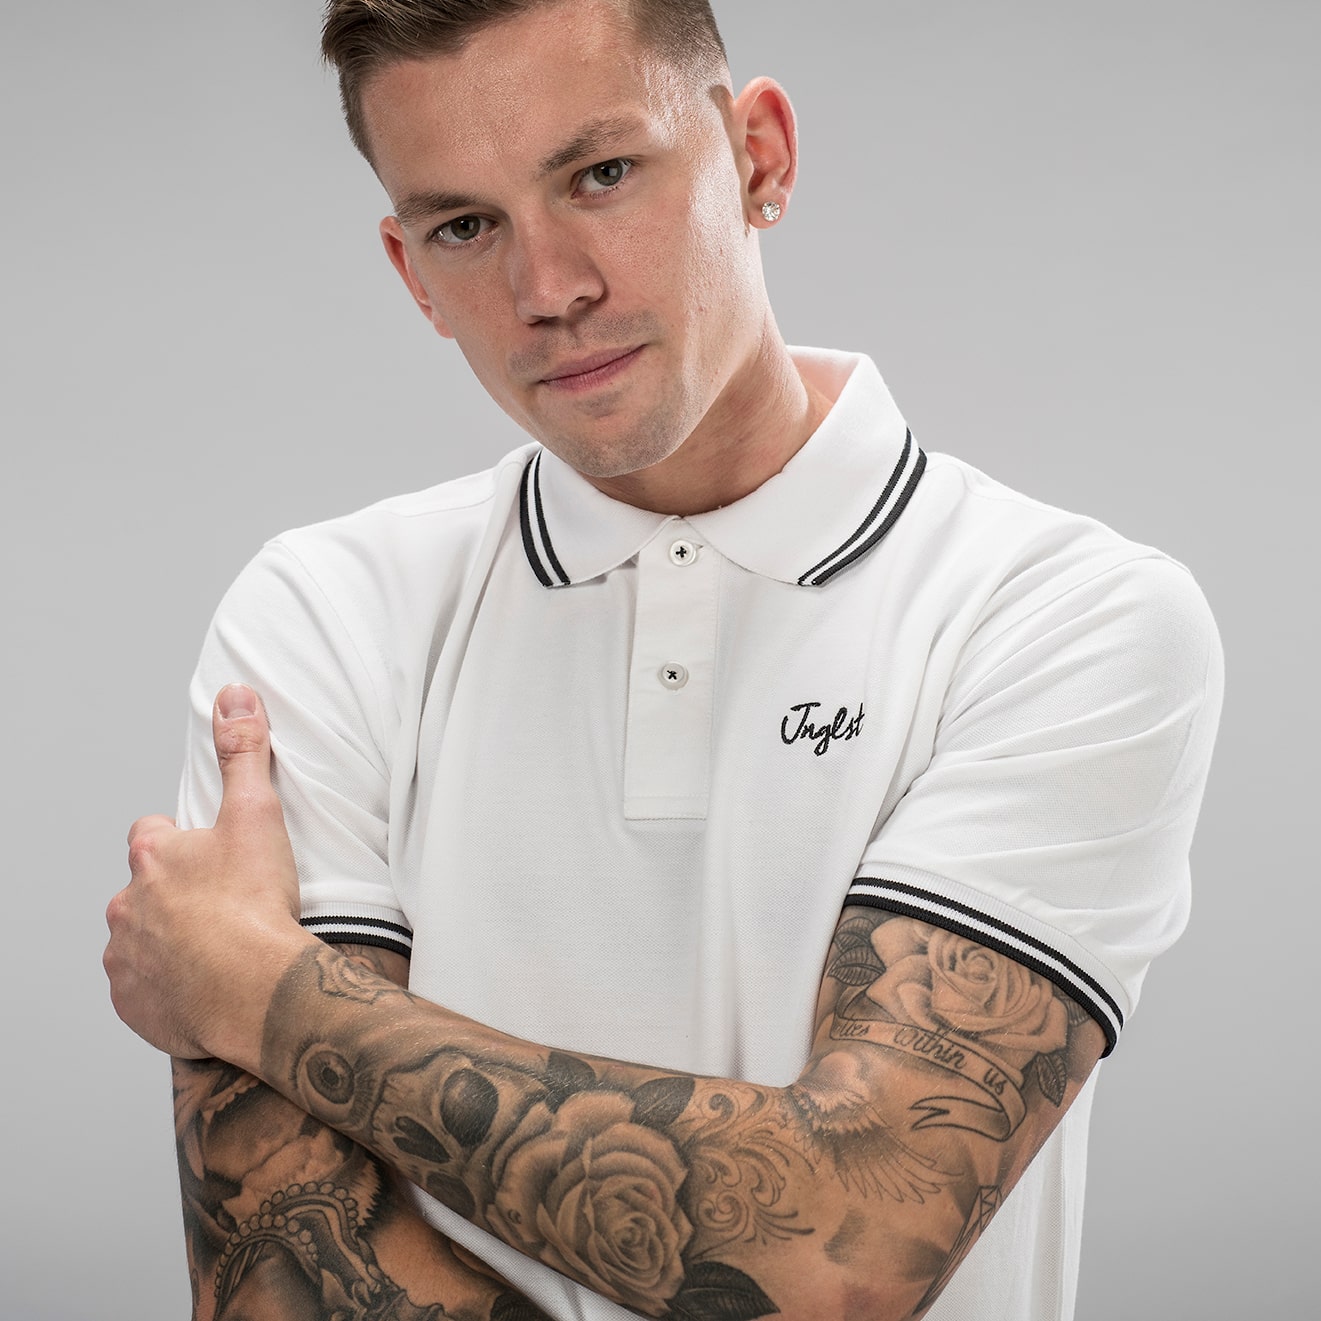 White Polo Shirt for Junglist and Drum and Bass ravers